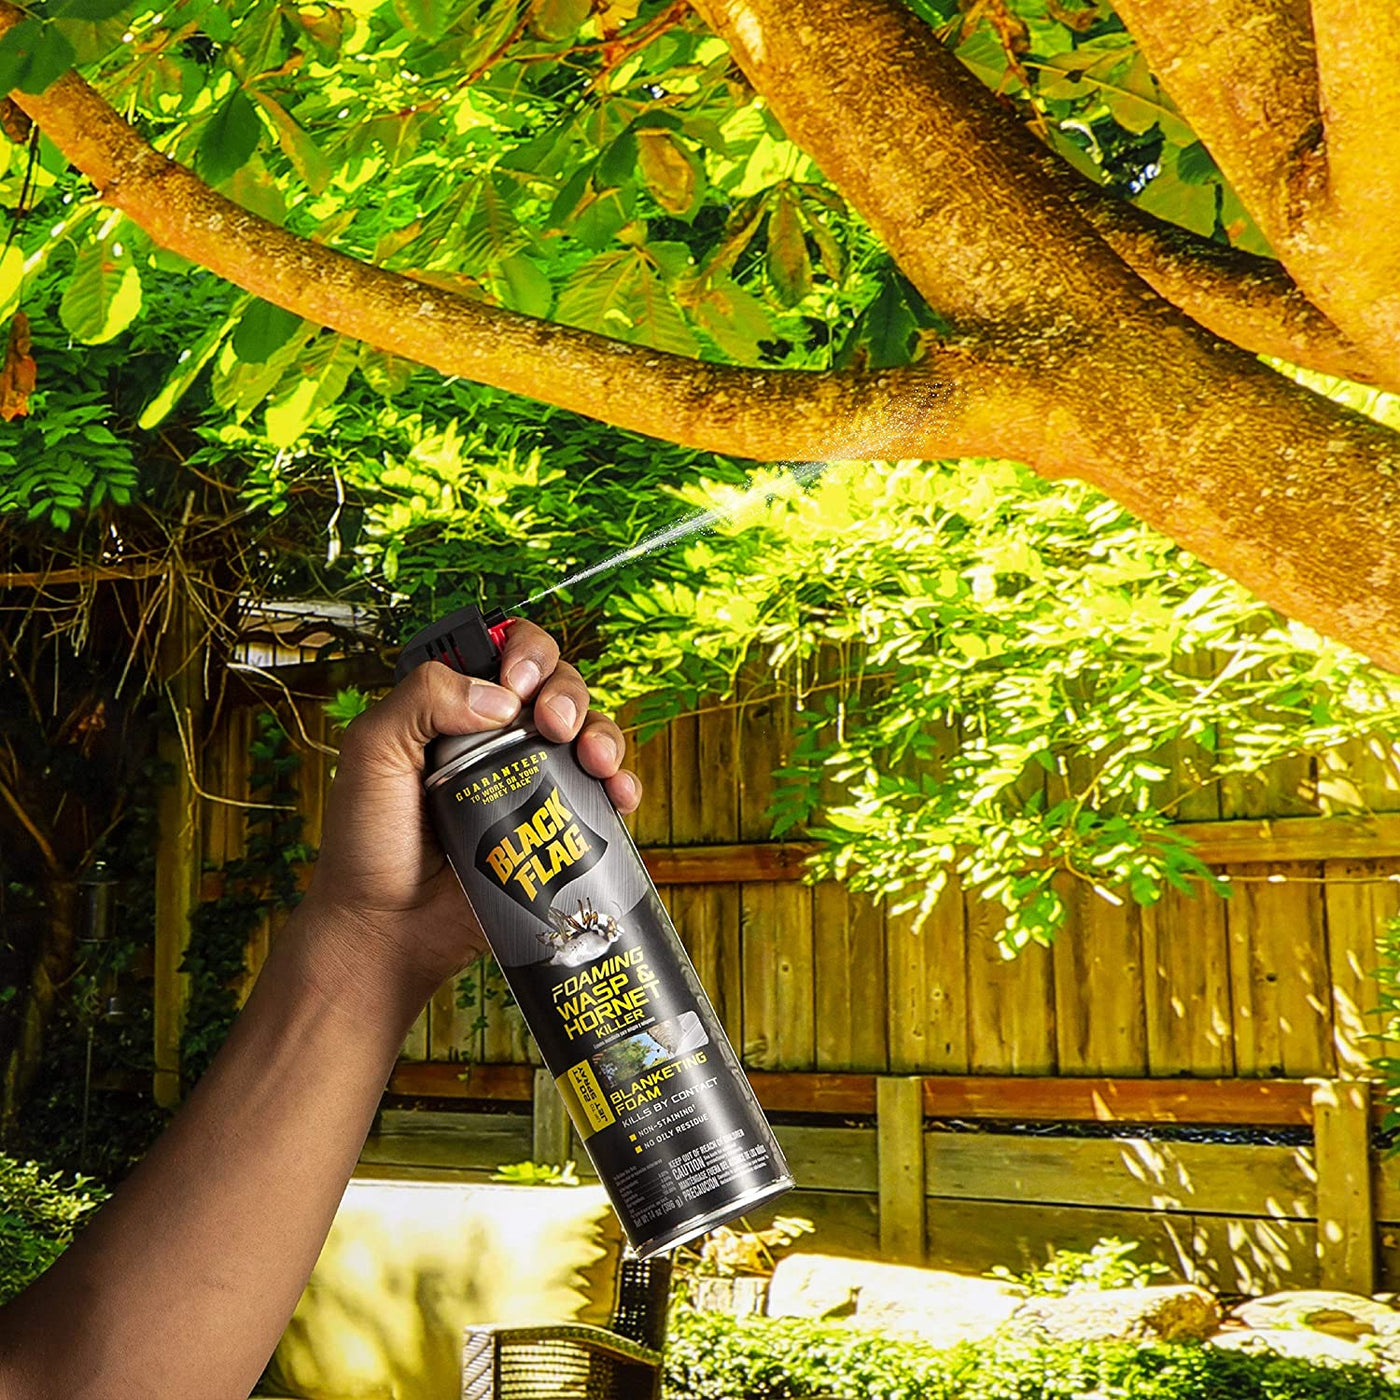 Black Flag Foaming Wasp & Hornet Killer, Kills Wasps and Hornets Nests By Contact, 14 Ounce (Aerosol Spray)